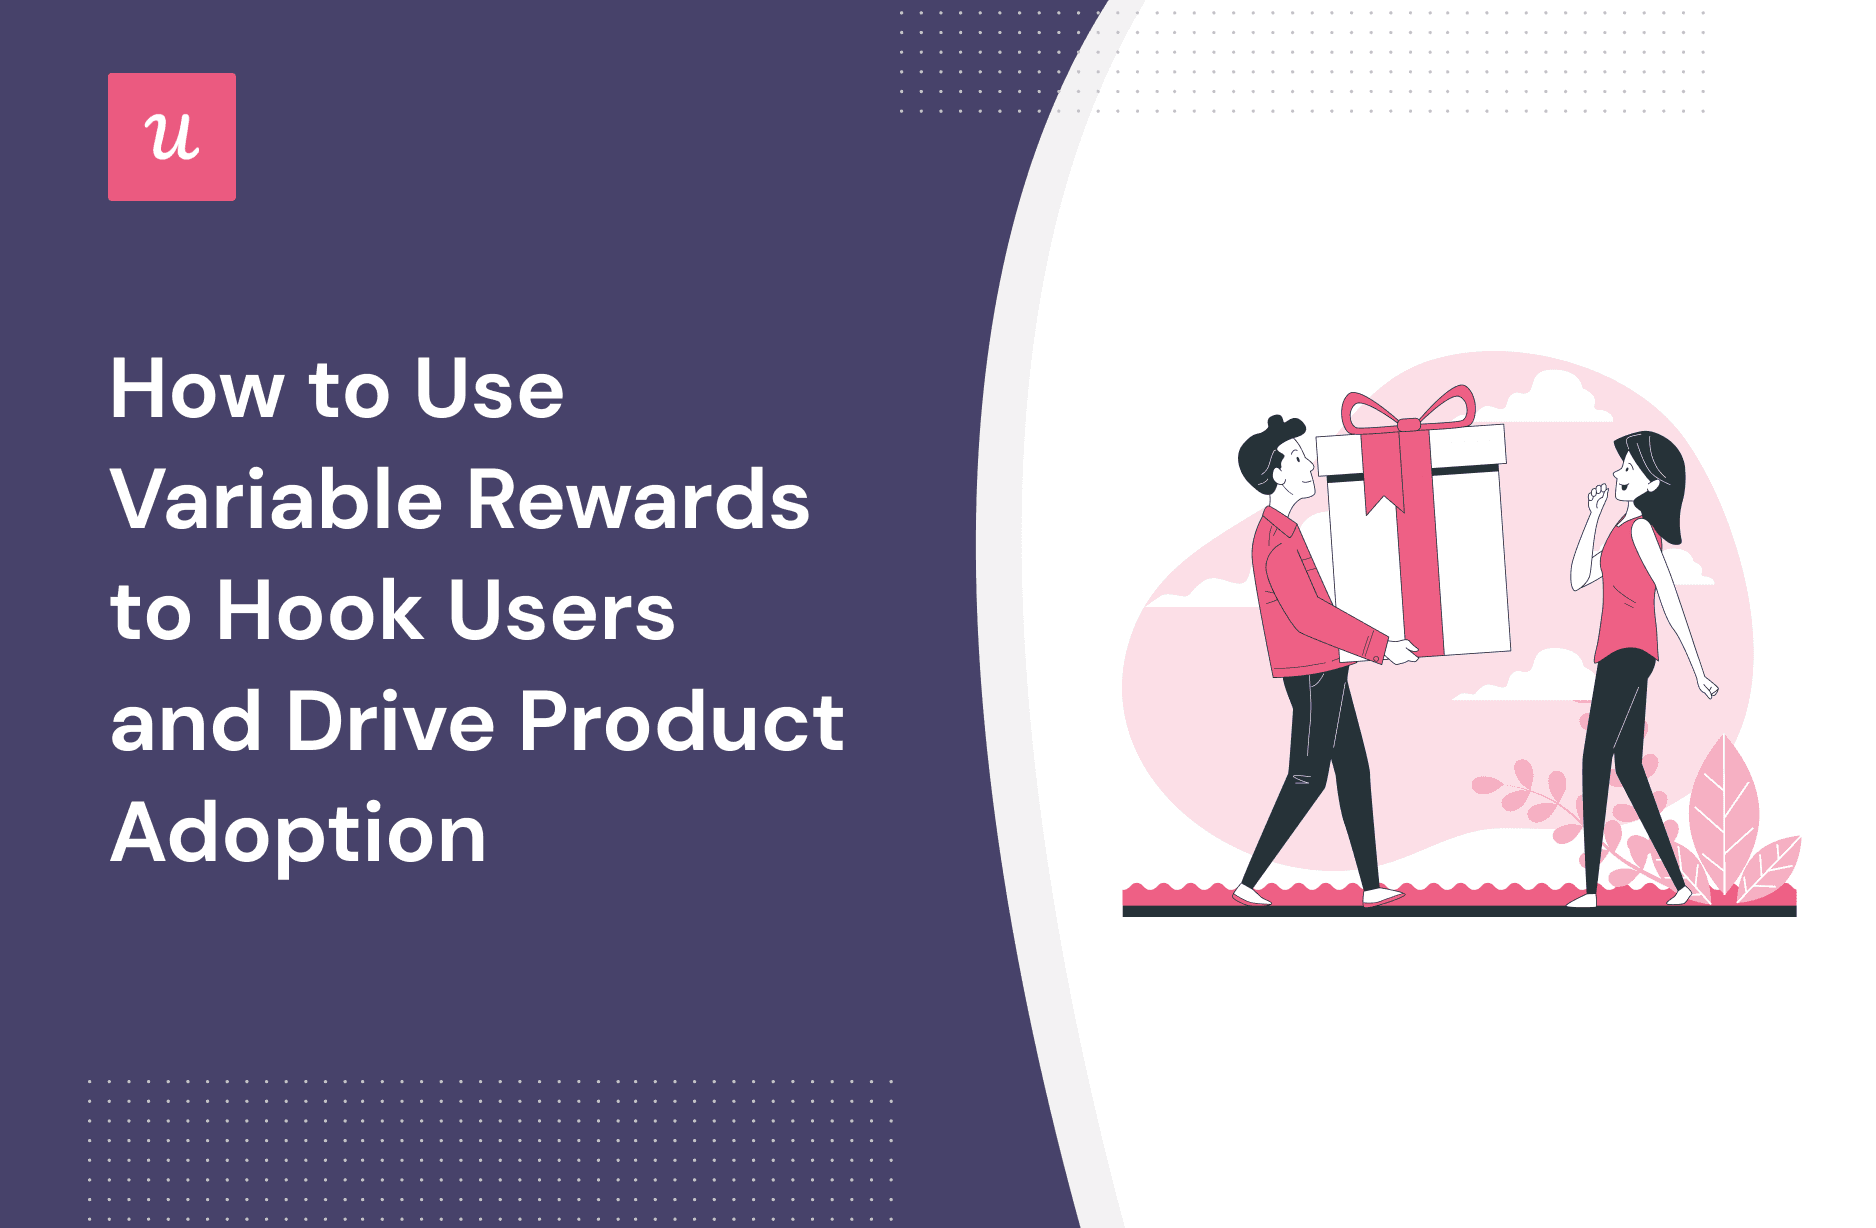 How to Use Variable Rewards to Hook Users and Drive Product Adoption cover